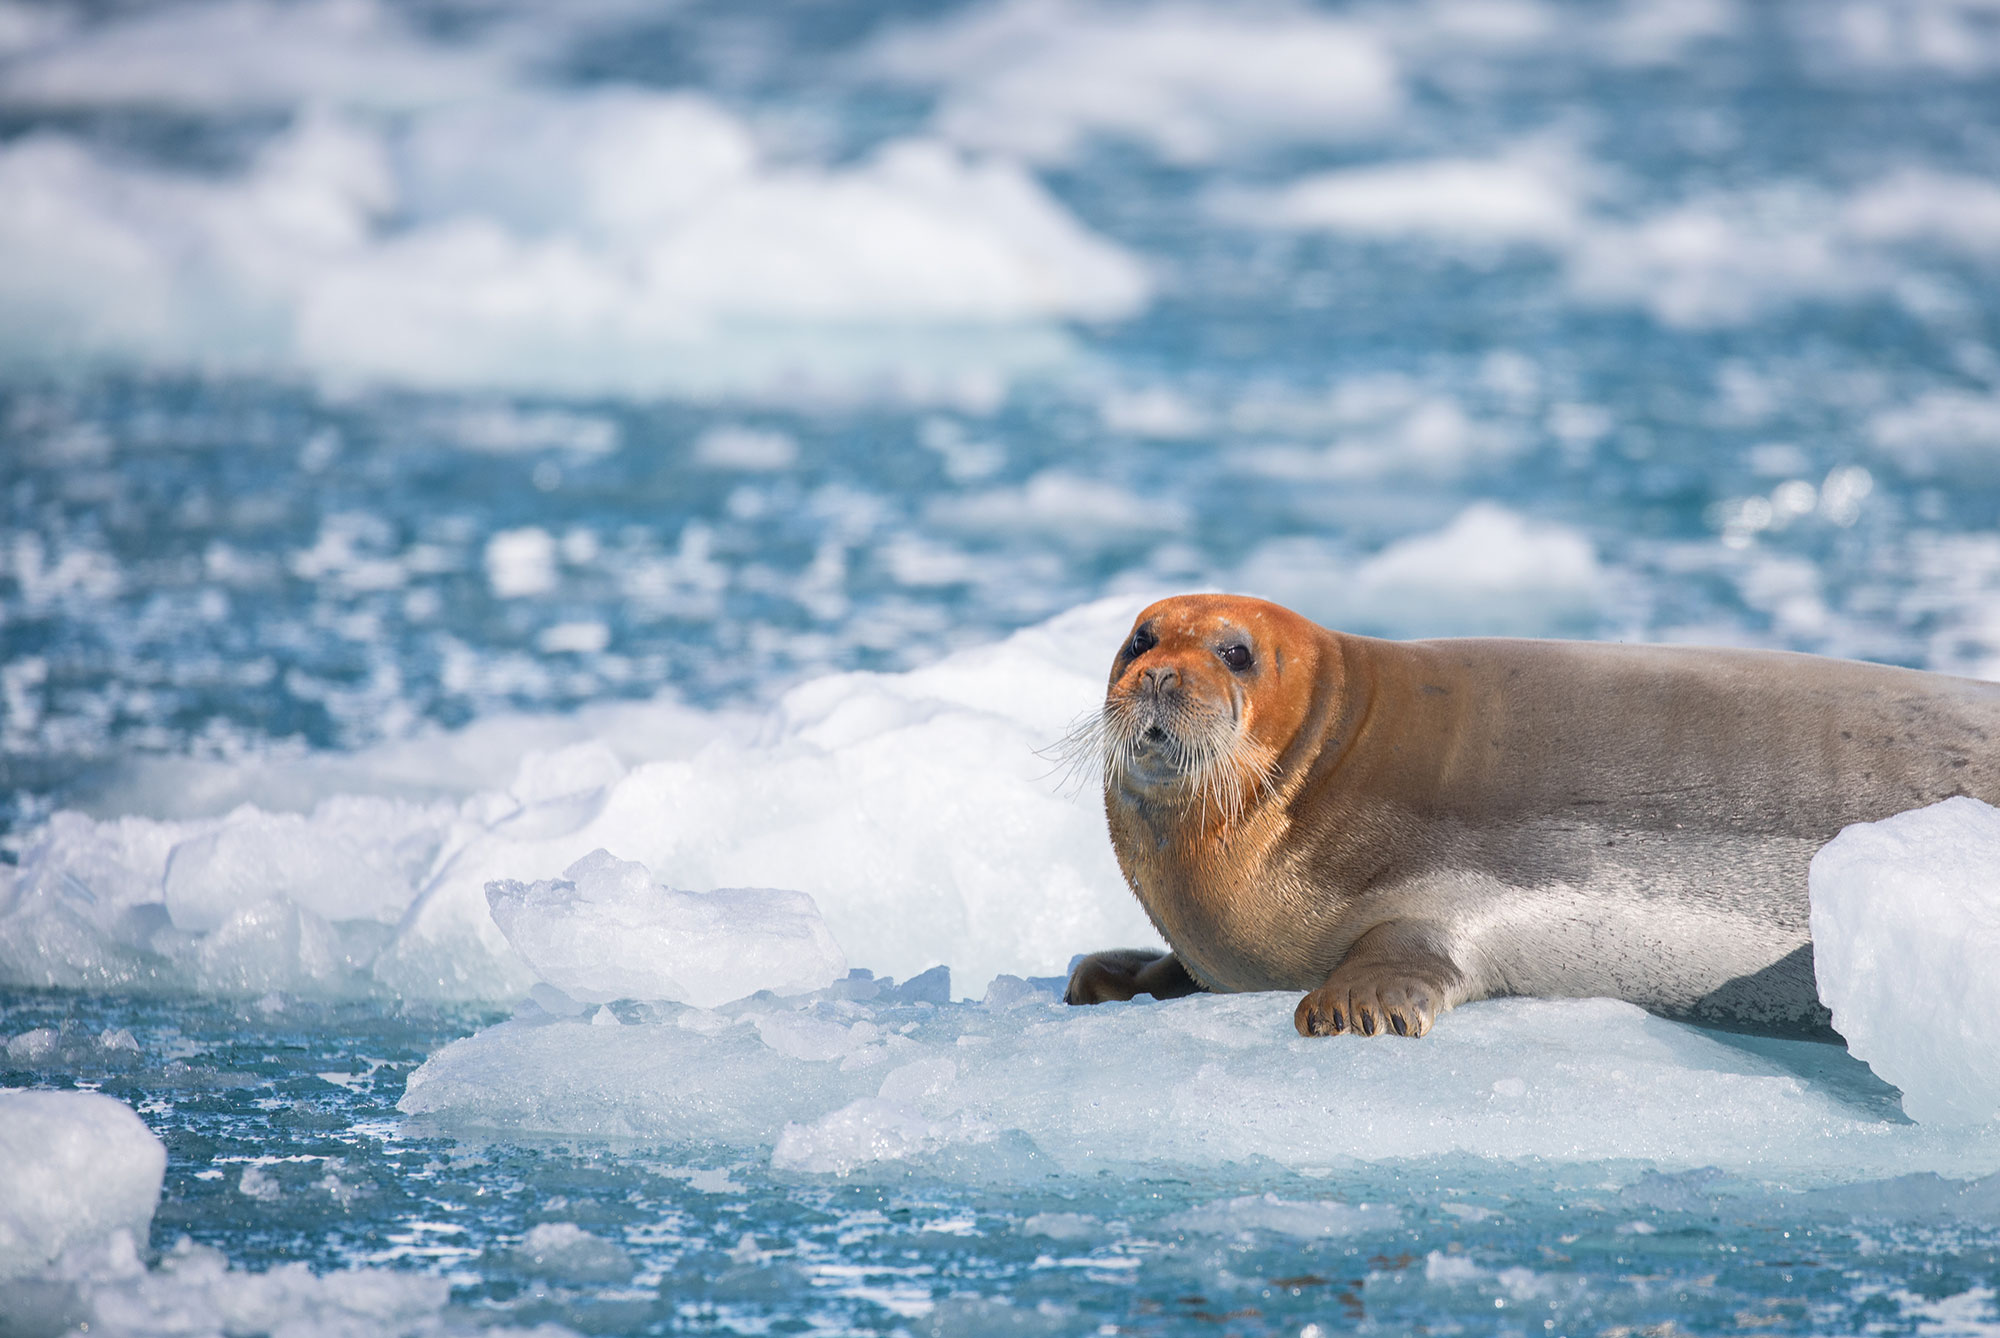 A bearded seal poses for the camera at Lilliehook Glacier, Svalbard.